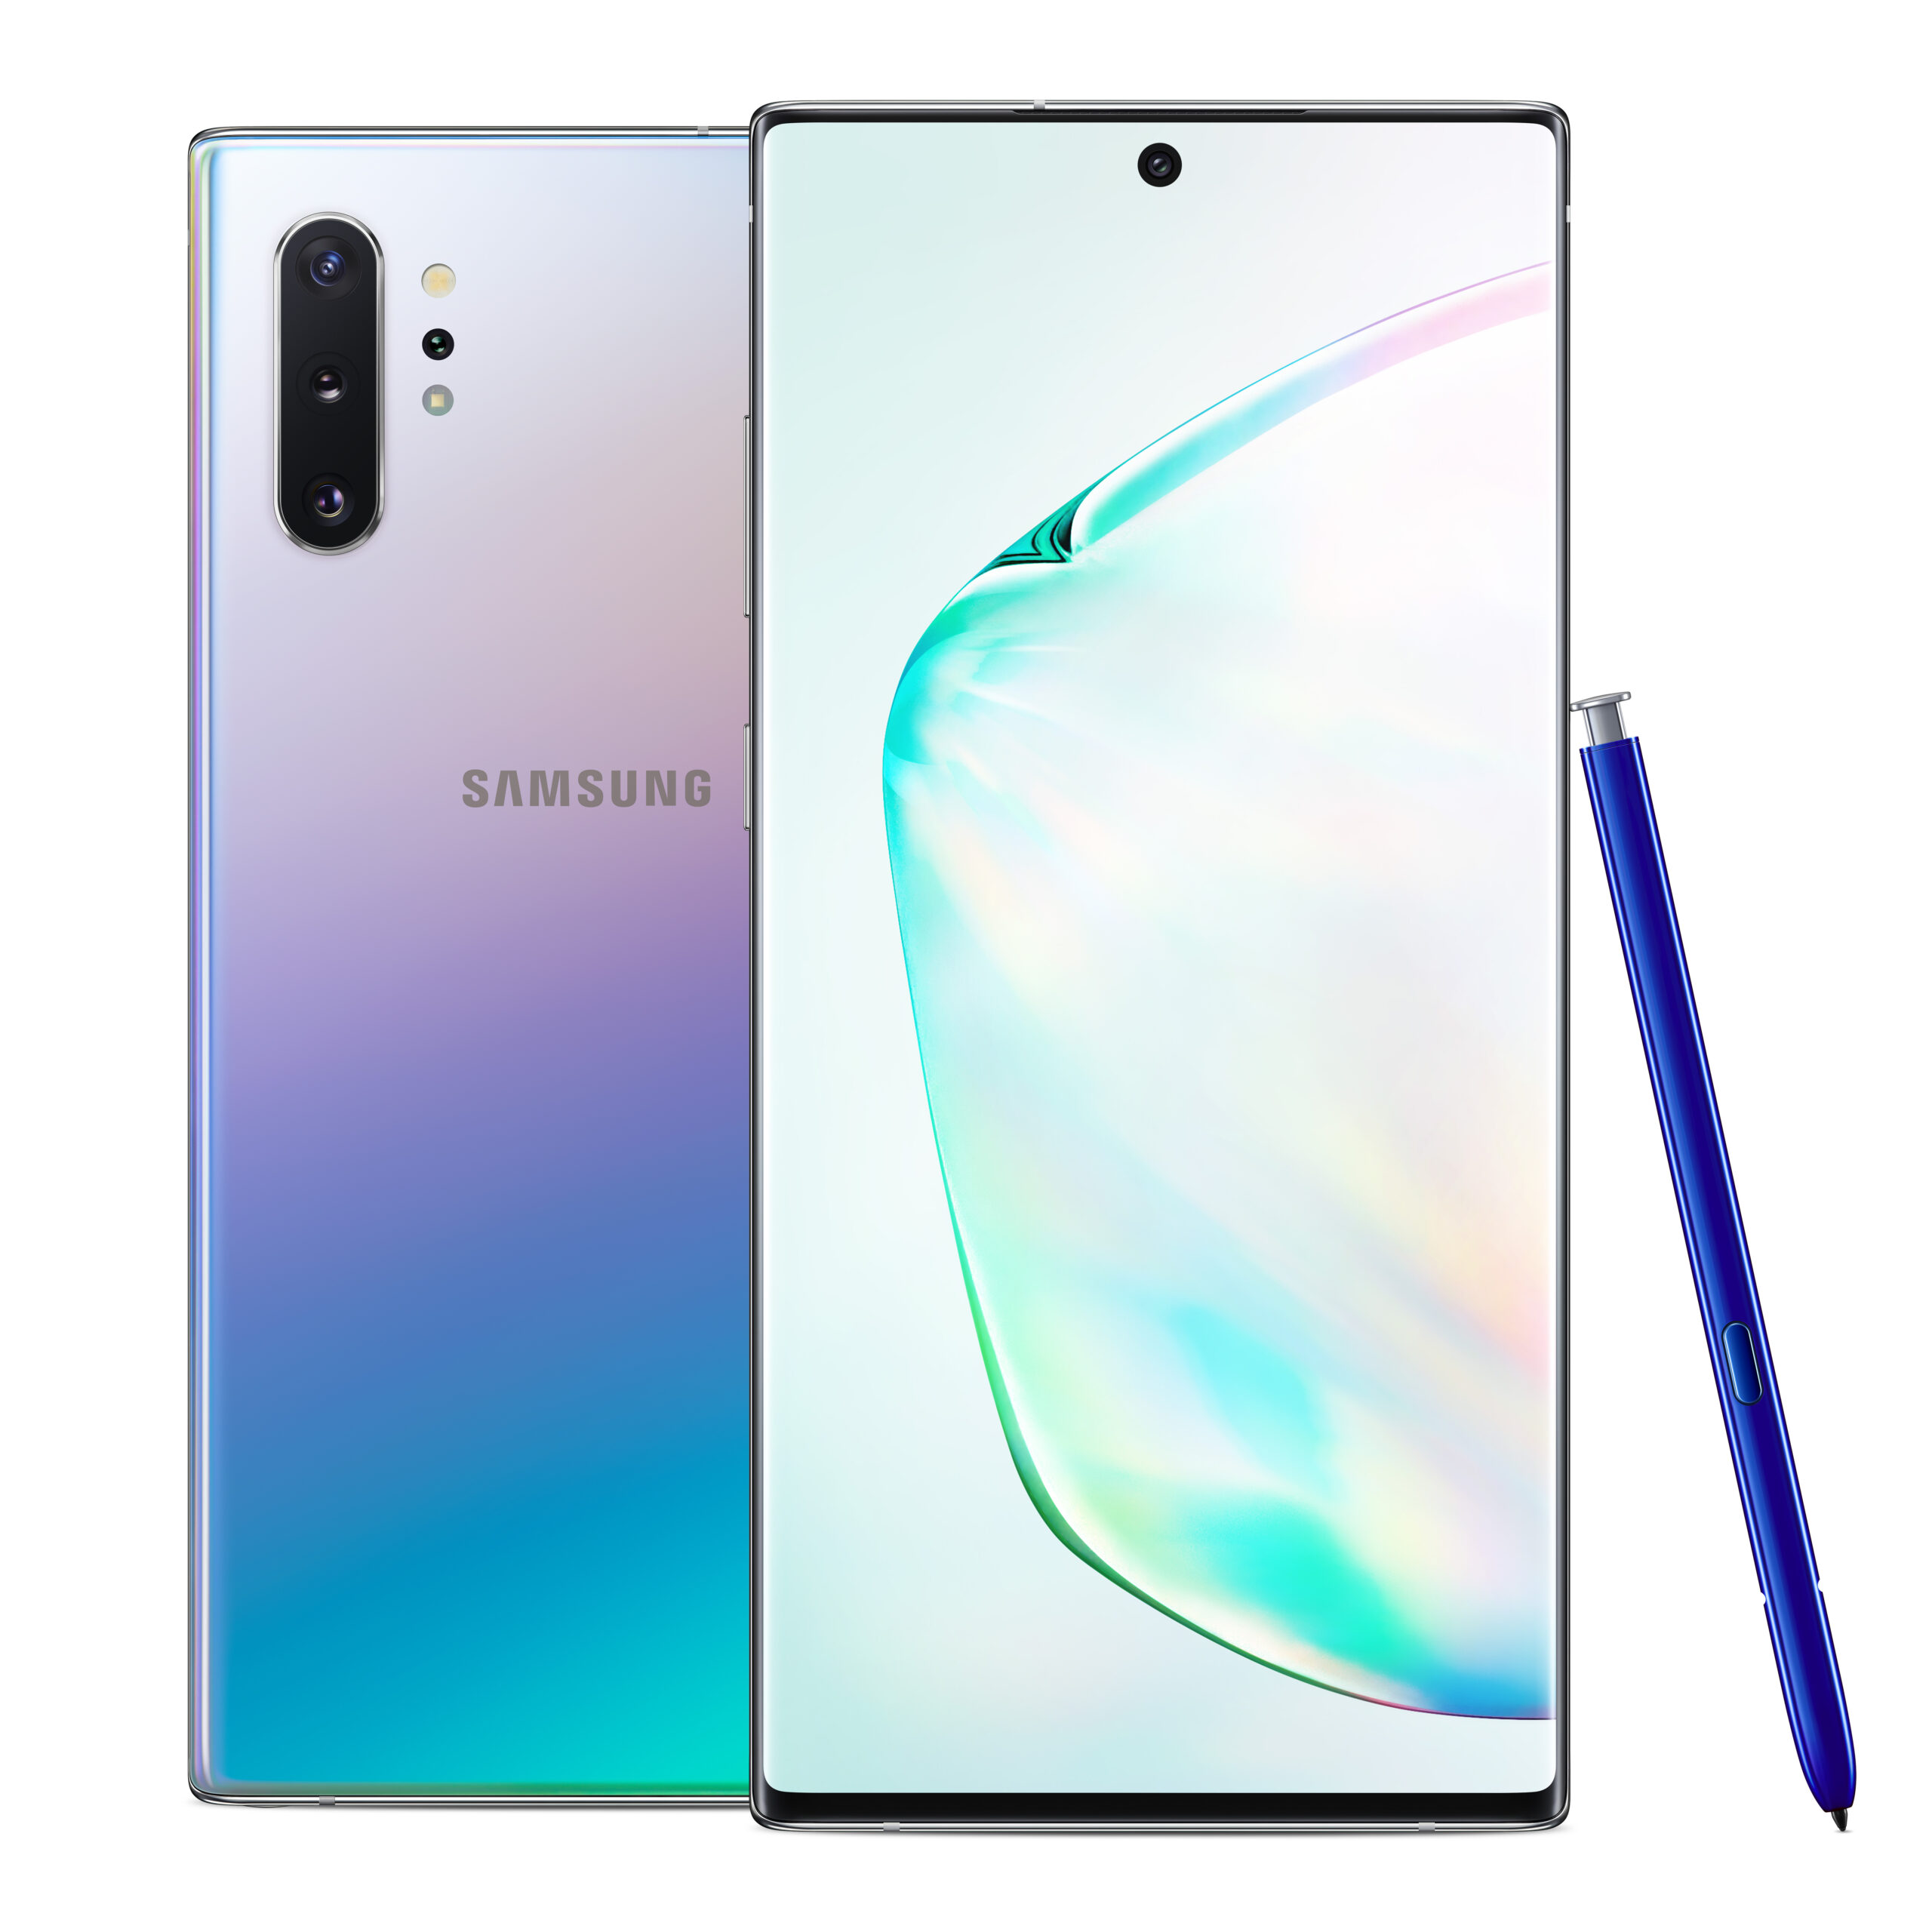 What to know about the new Samsung Galaxy Note10 and Note10+